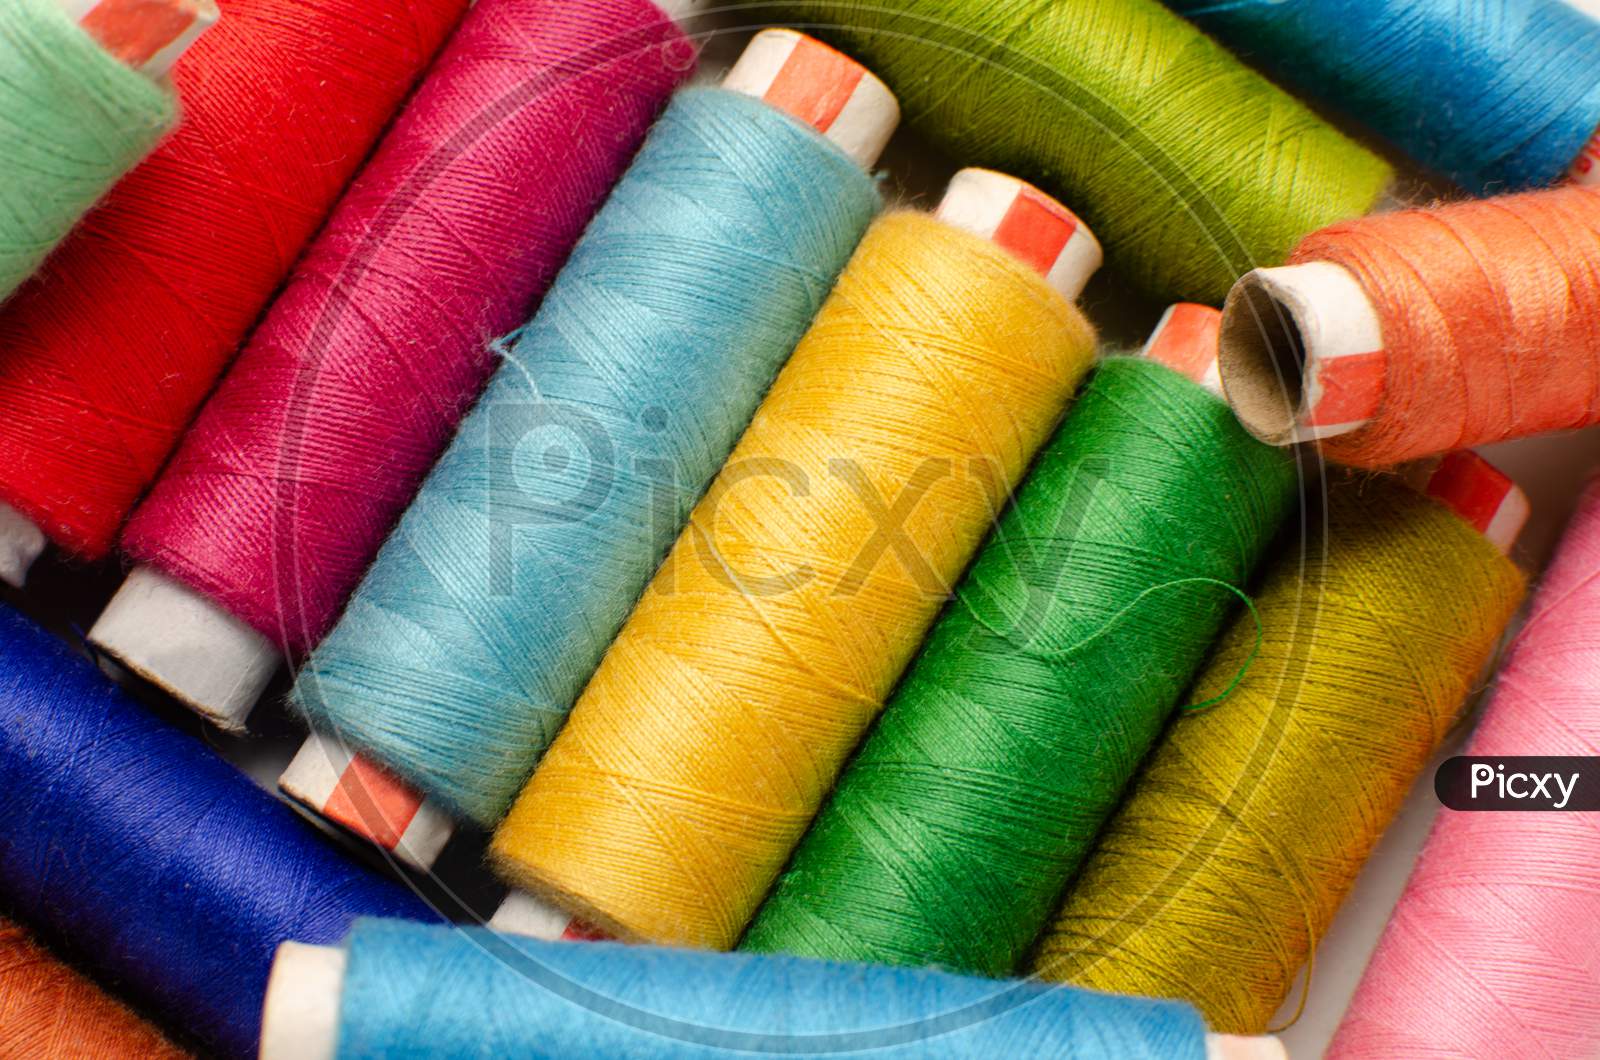 Multicolor Sewing Thread Roll Background